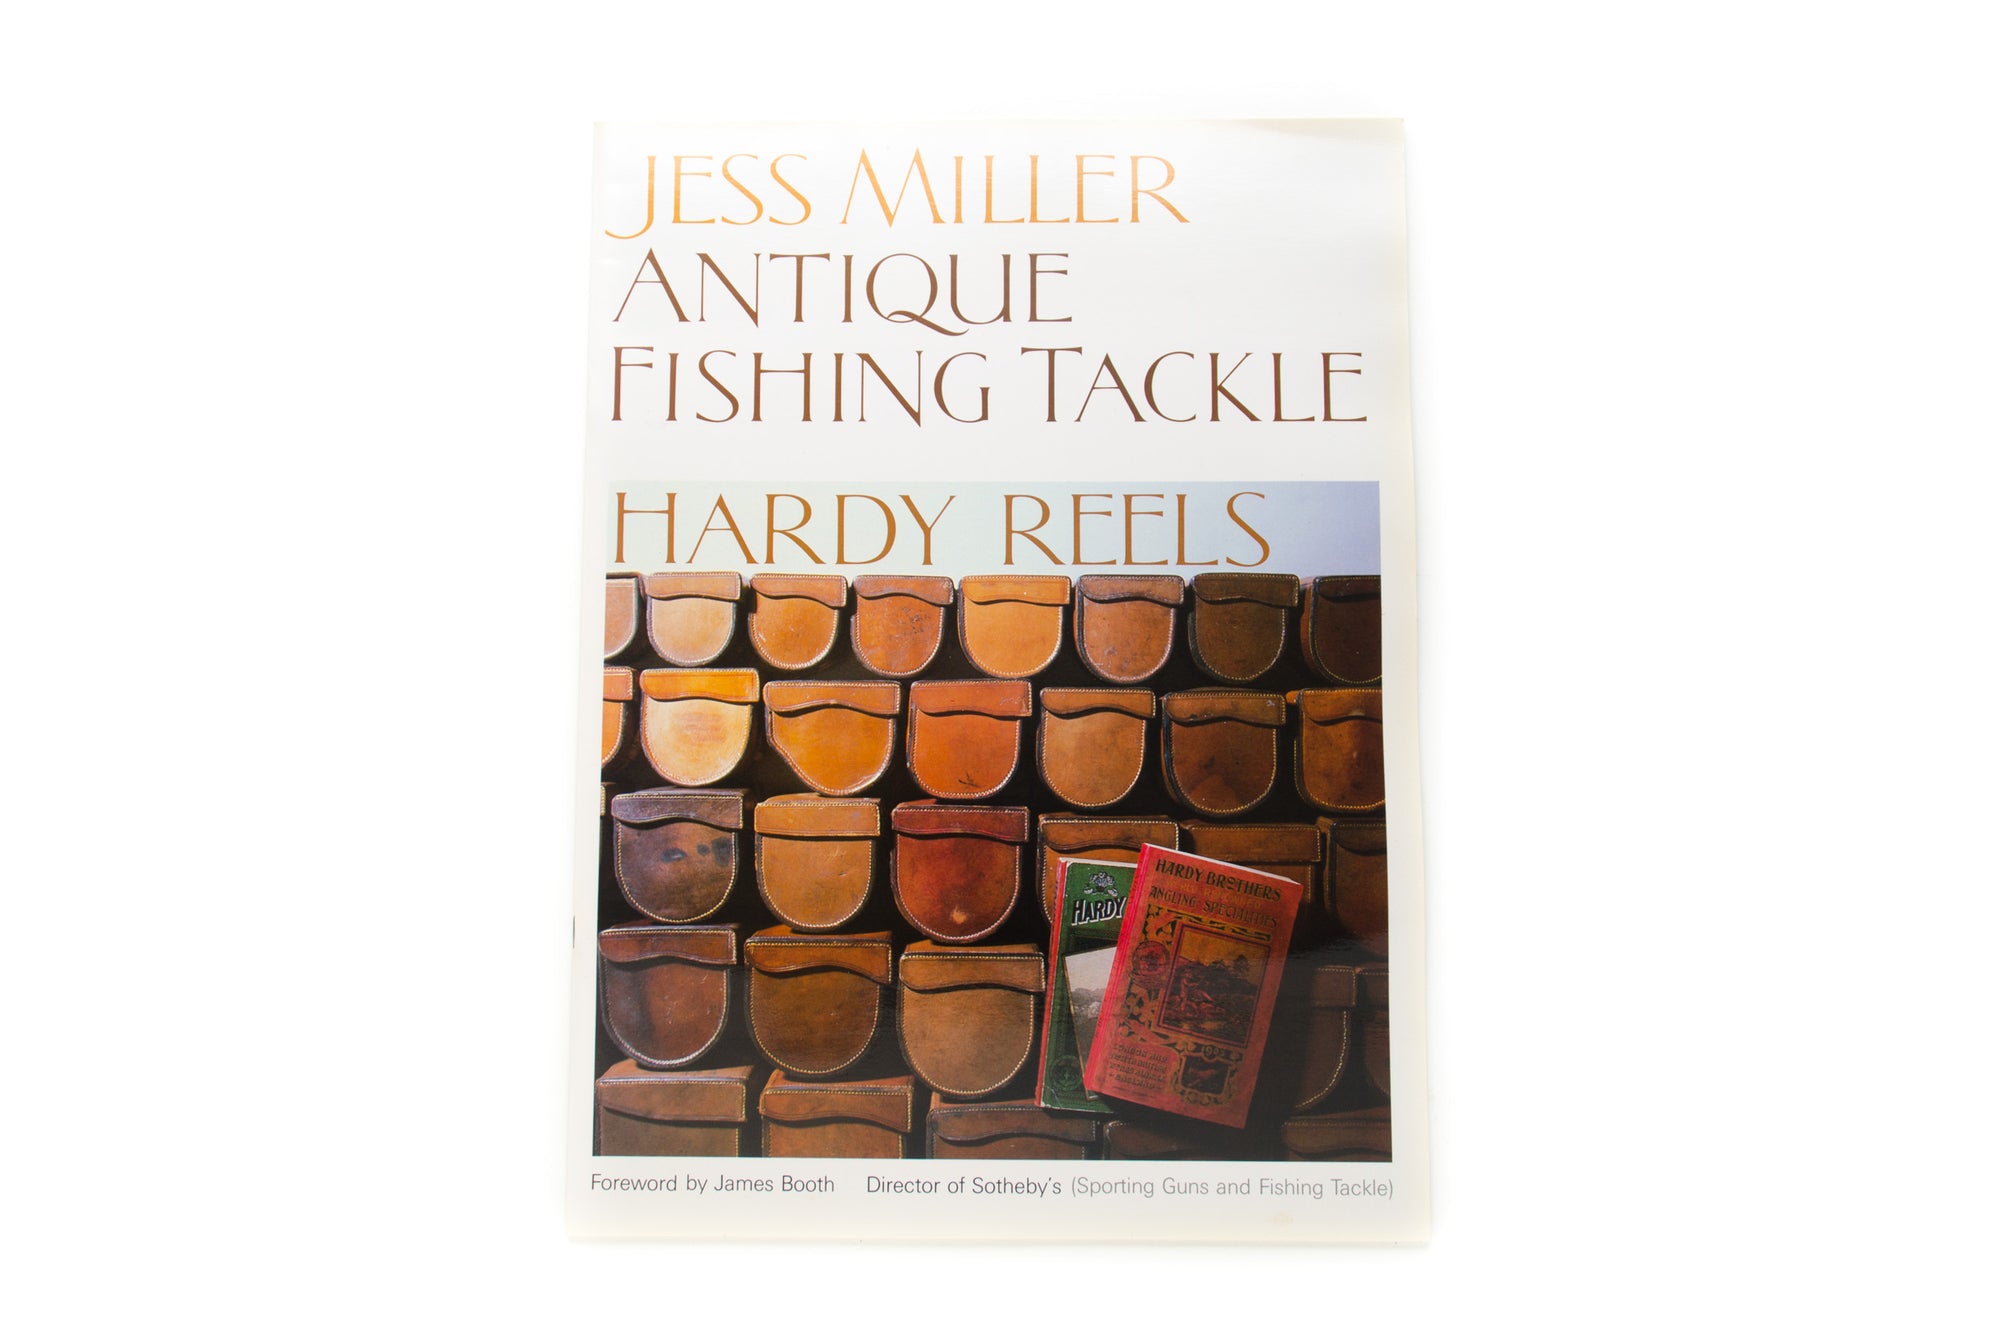 Antique Fishing Tackle Hardy Reels Jess Miller